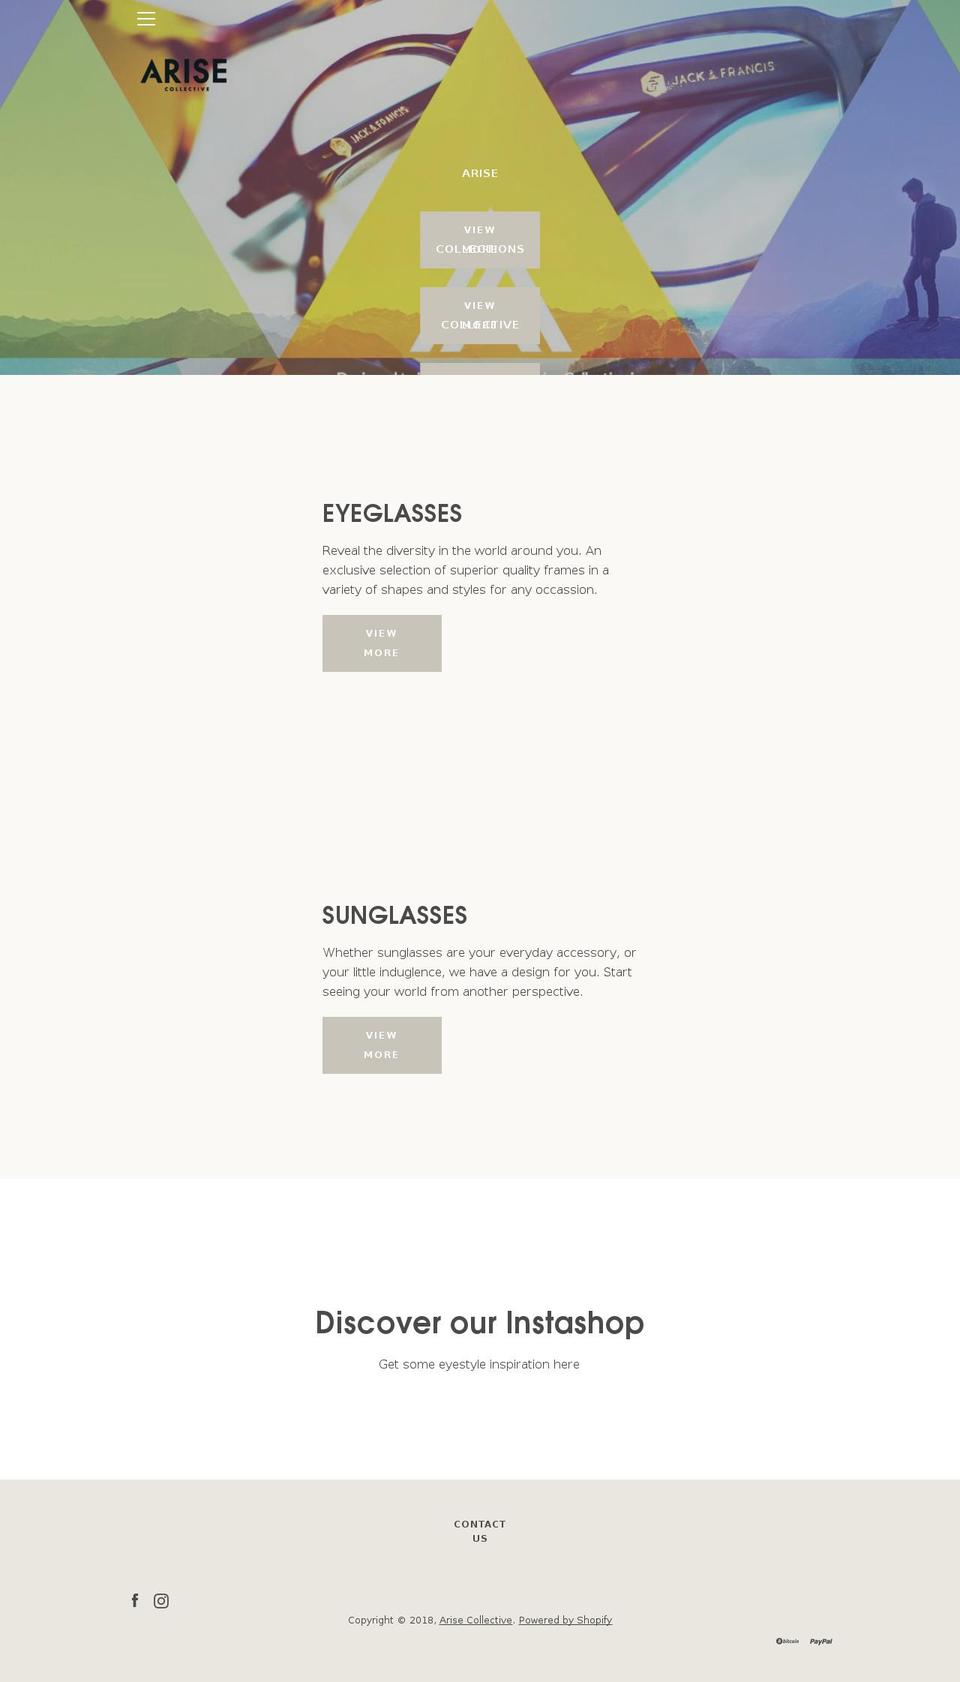 JiraDirk Shopify theme site example arisecollective.com